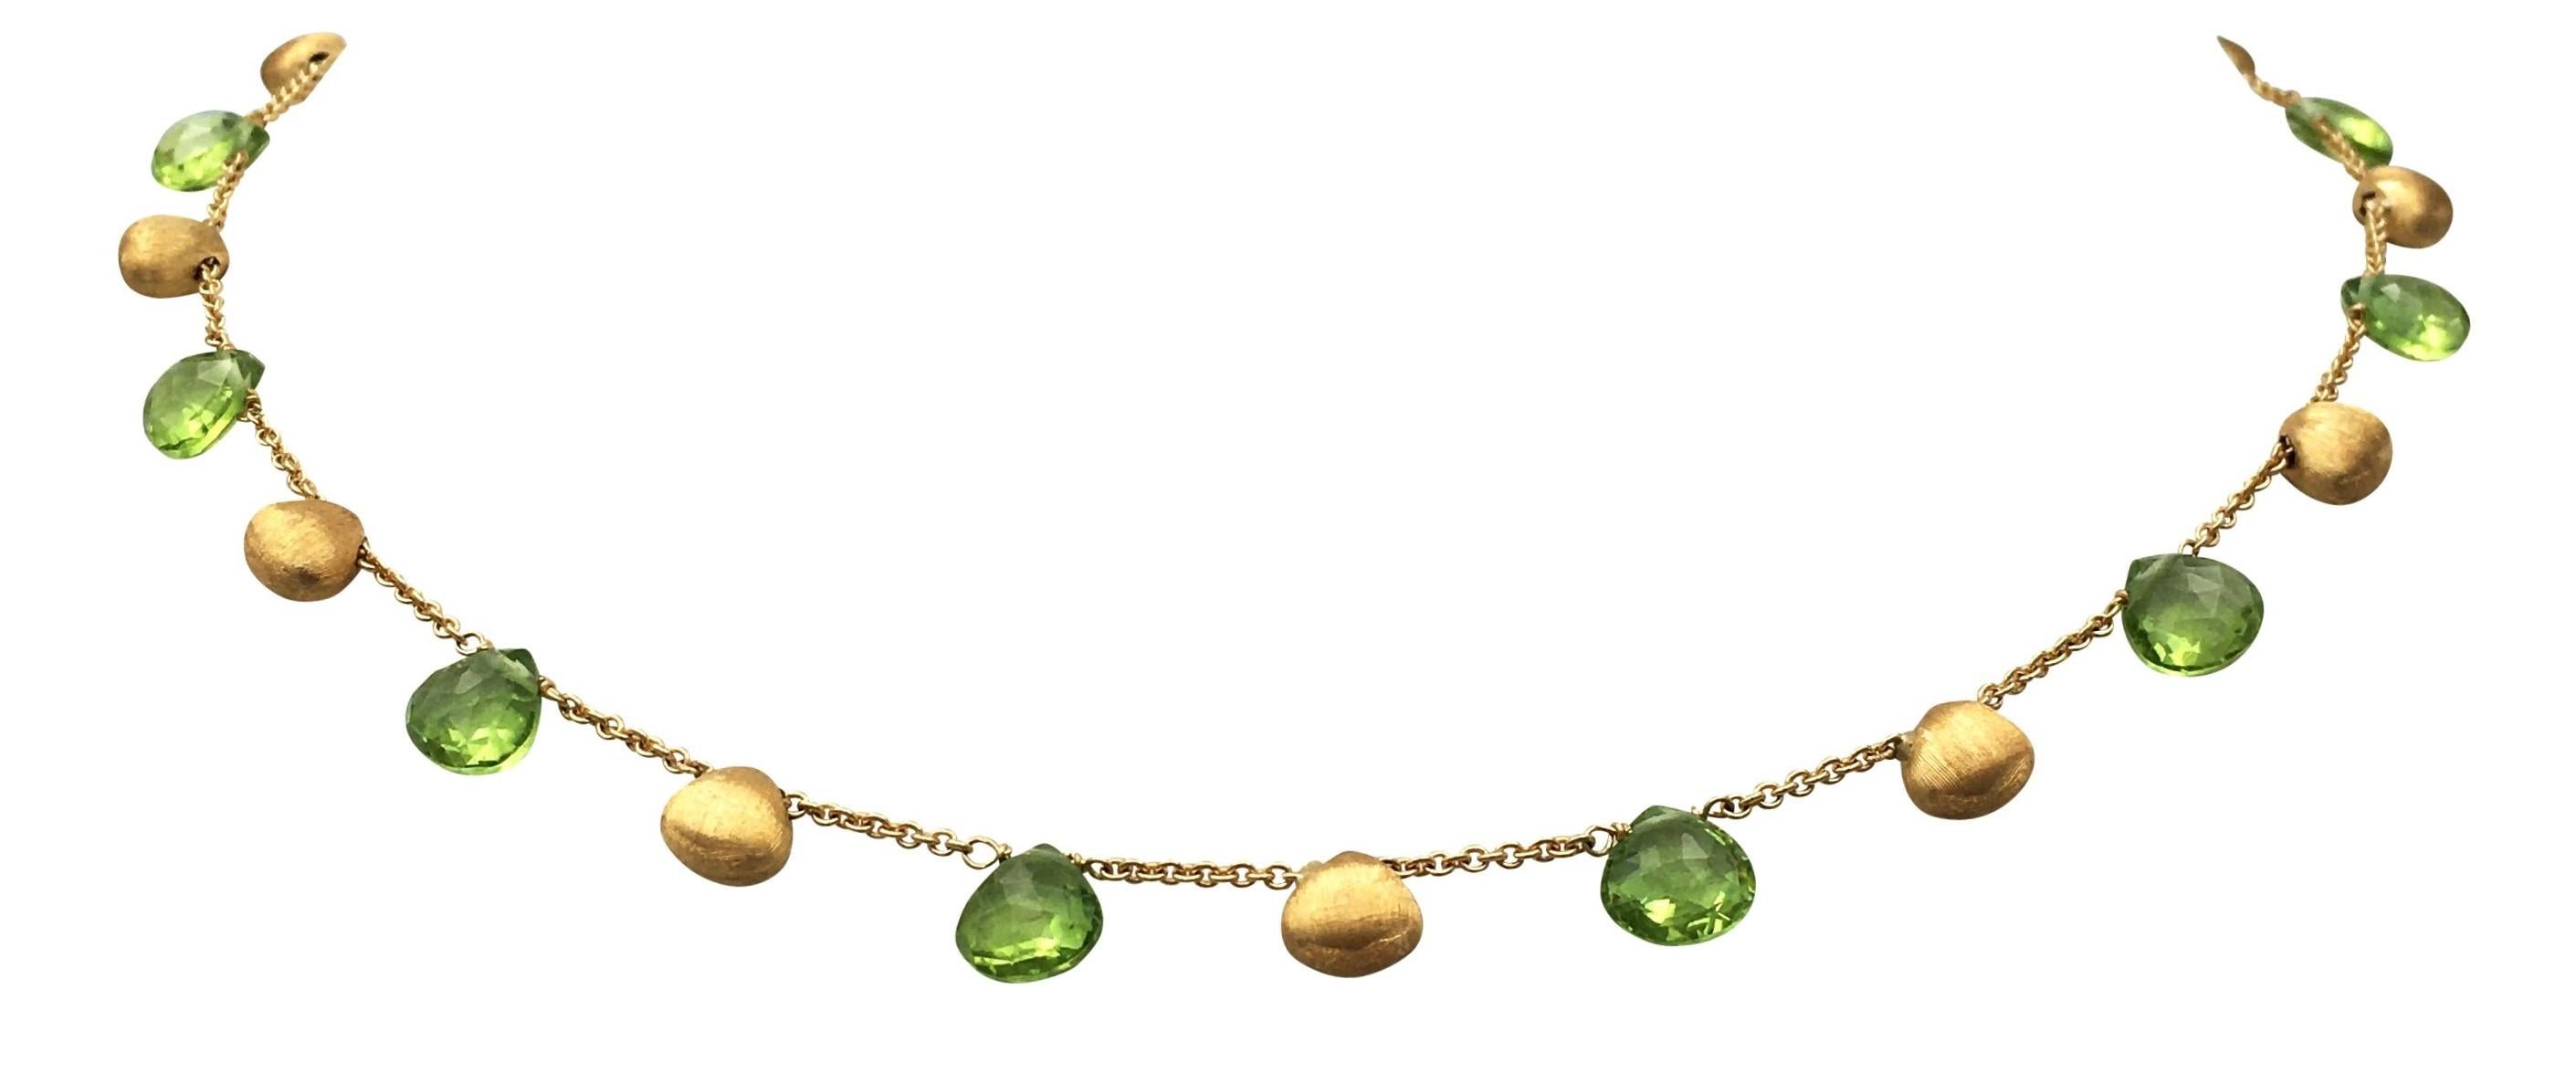 Authentic Marco Bicego Paradise necklace crafted in 18 karat yellow gold with 12 faceted peridot beads alternating with 13 textured gold beads.  Necklace measures 14 1/4 inches and is signed Macro Bicego, 750.  CIRCA 2010s